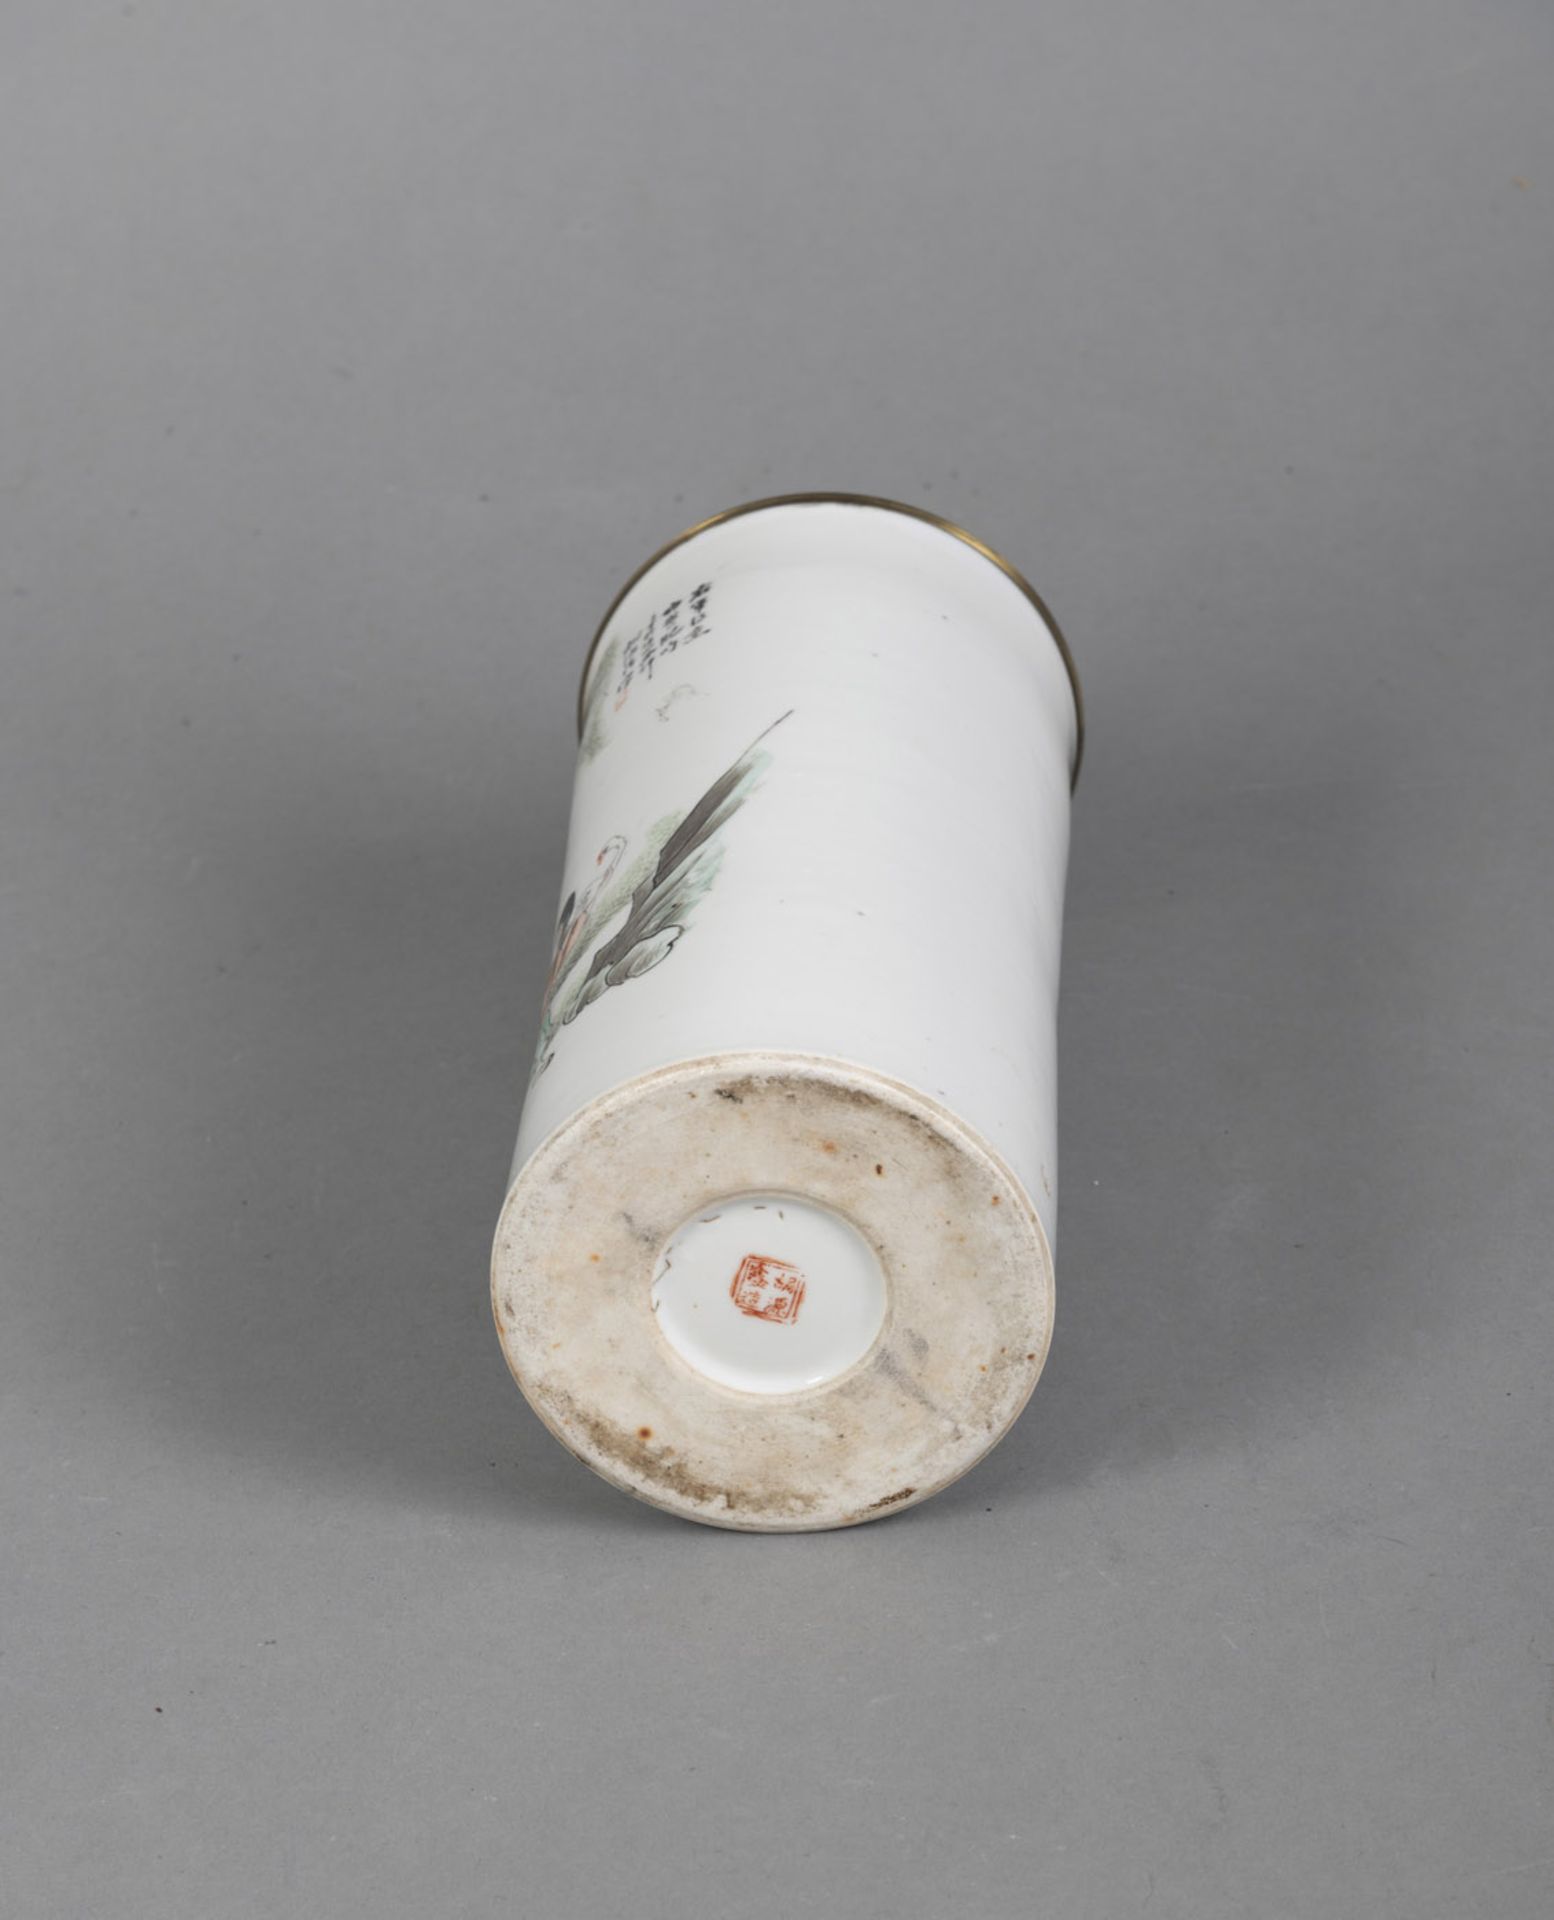 A CYLINDRICAL POLYCHROME PAINTED PORCELAIN HAT STAND DEPICTING 'WANG XIZHI AND HIS GOOSE' - Image 3 of 3